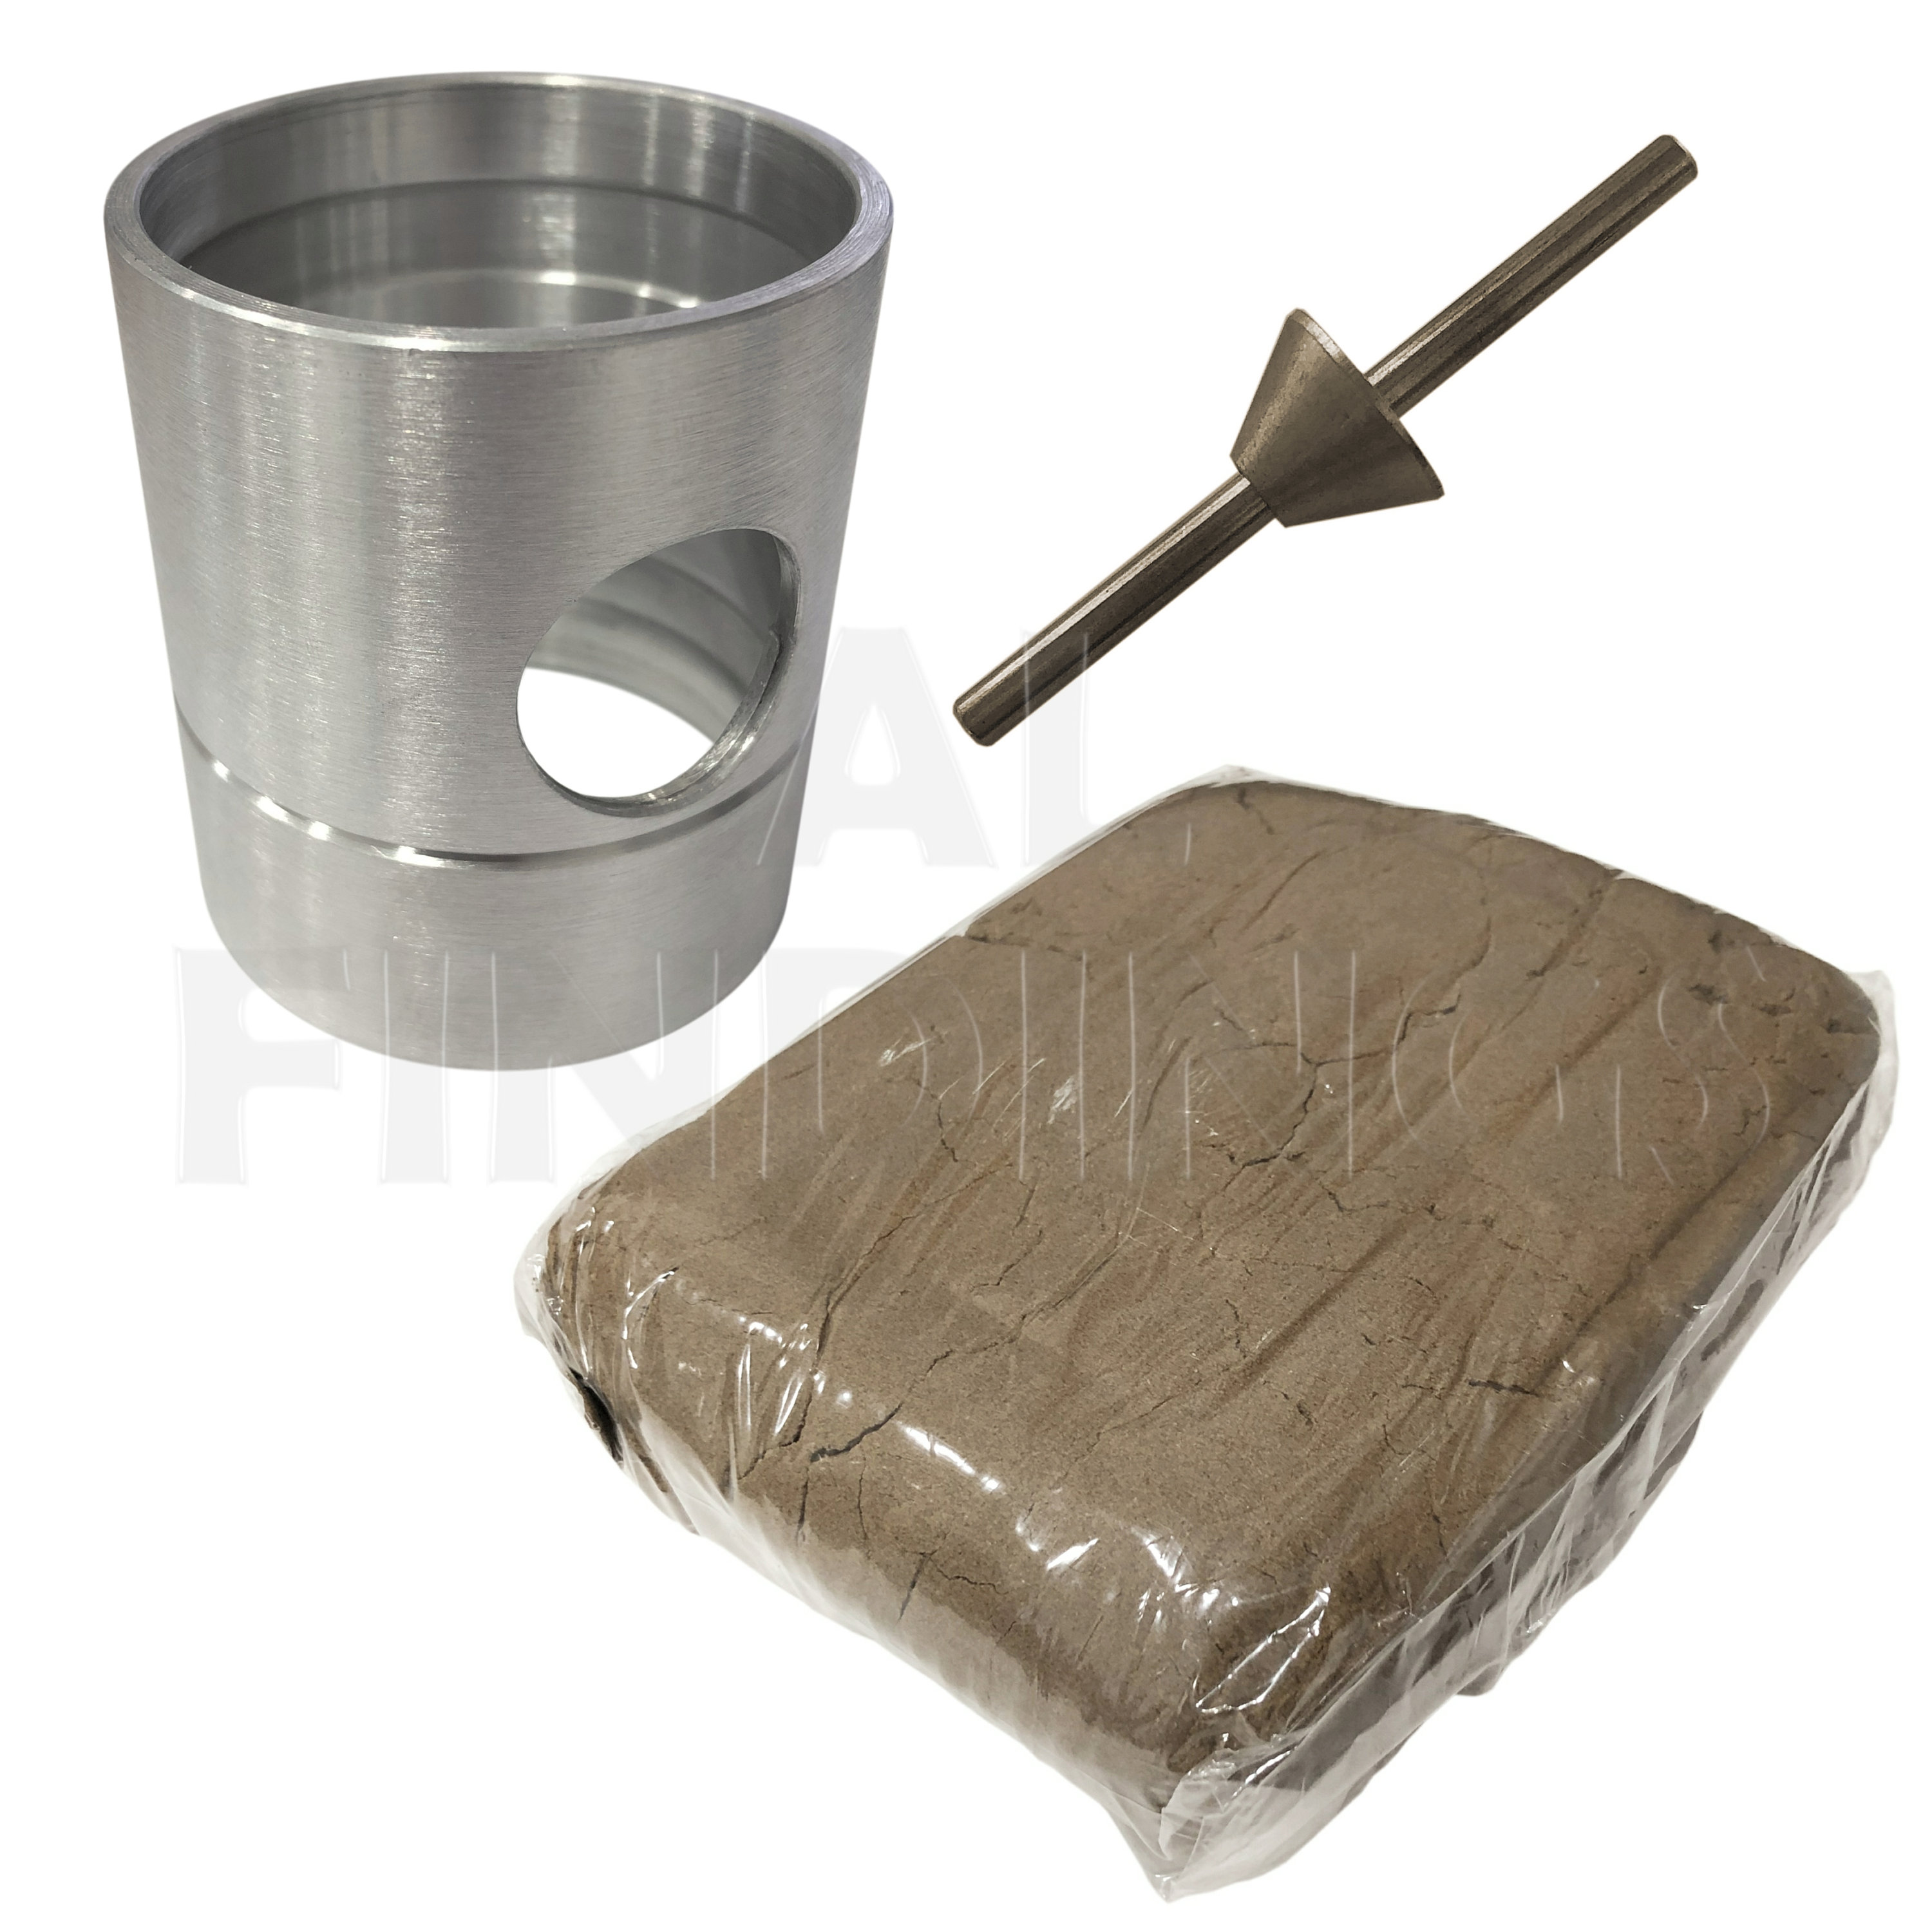 Sand Casting Set with 4.4 Lbs of Delft Clay Sand, Cast Iron Mold Flask  Frame,1 Kg Foundry Graphite Crucible,Tongs and Gloves, KIT-0258